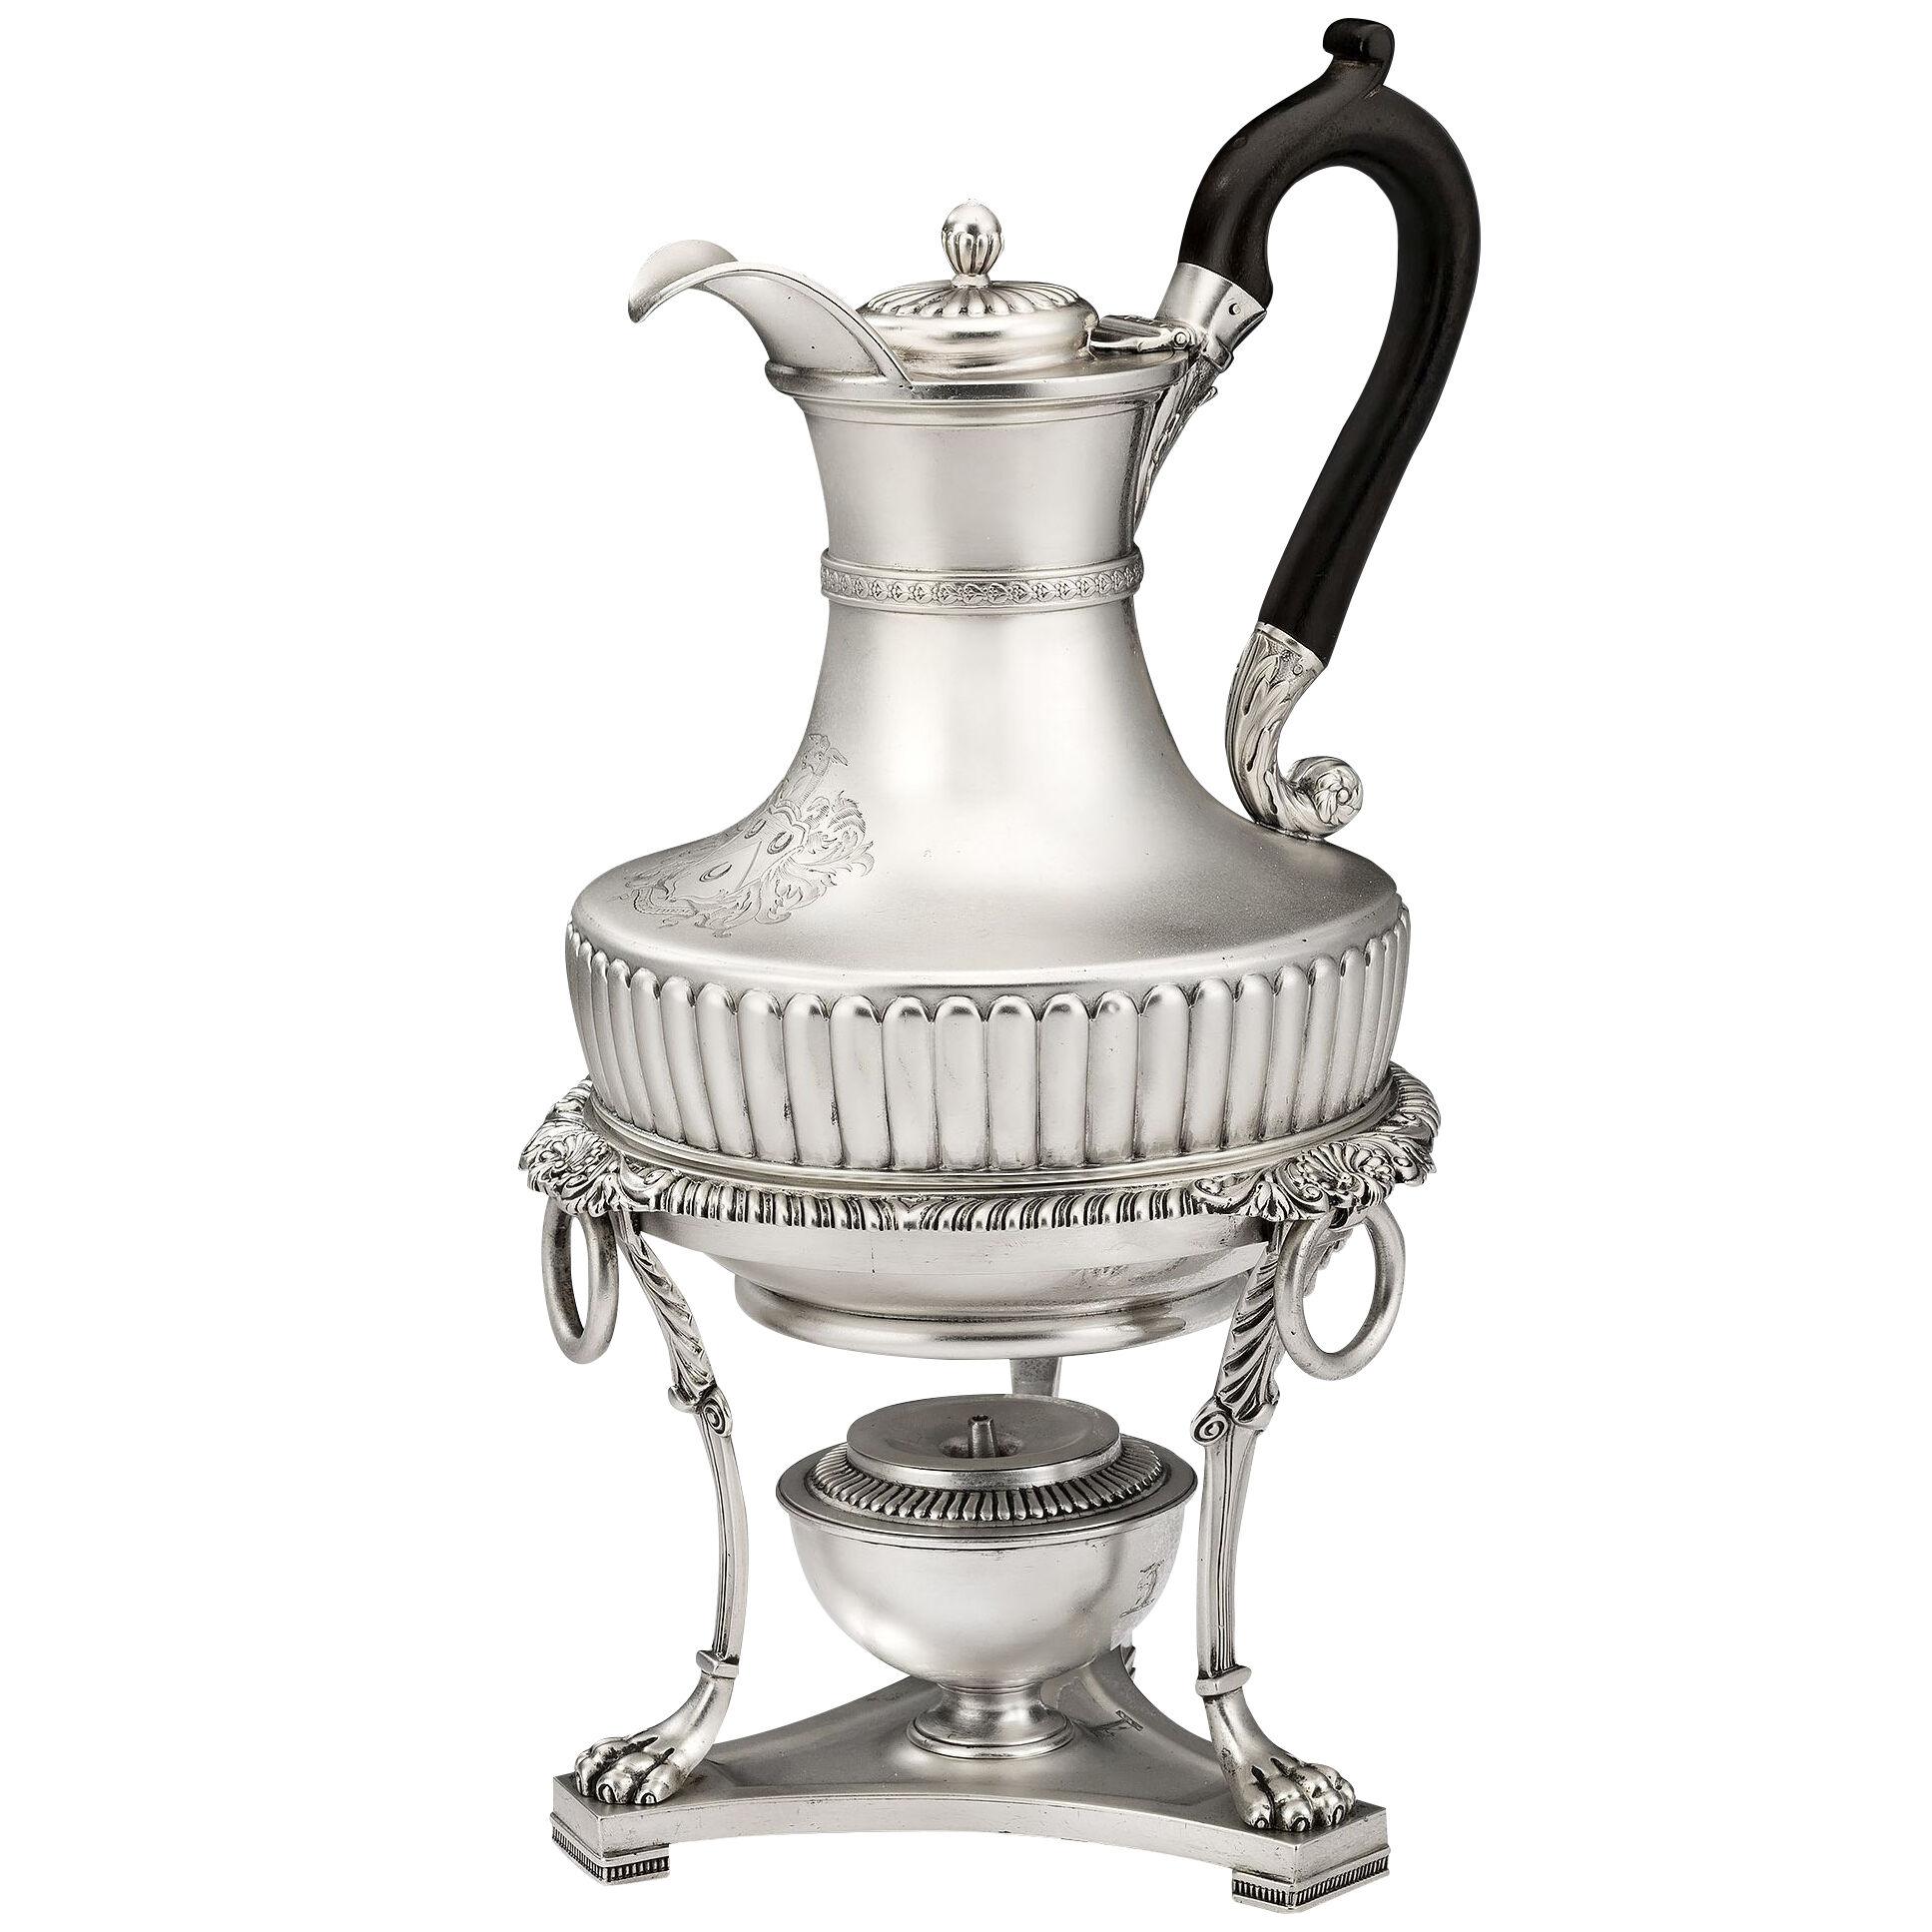 A George III Jug on Lamstand made in London in 1807 by Paul Storr.